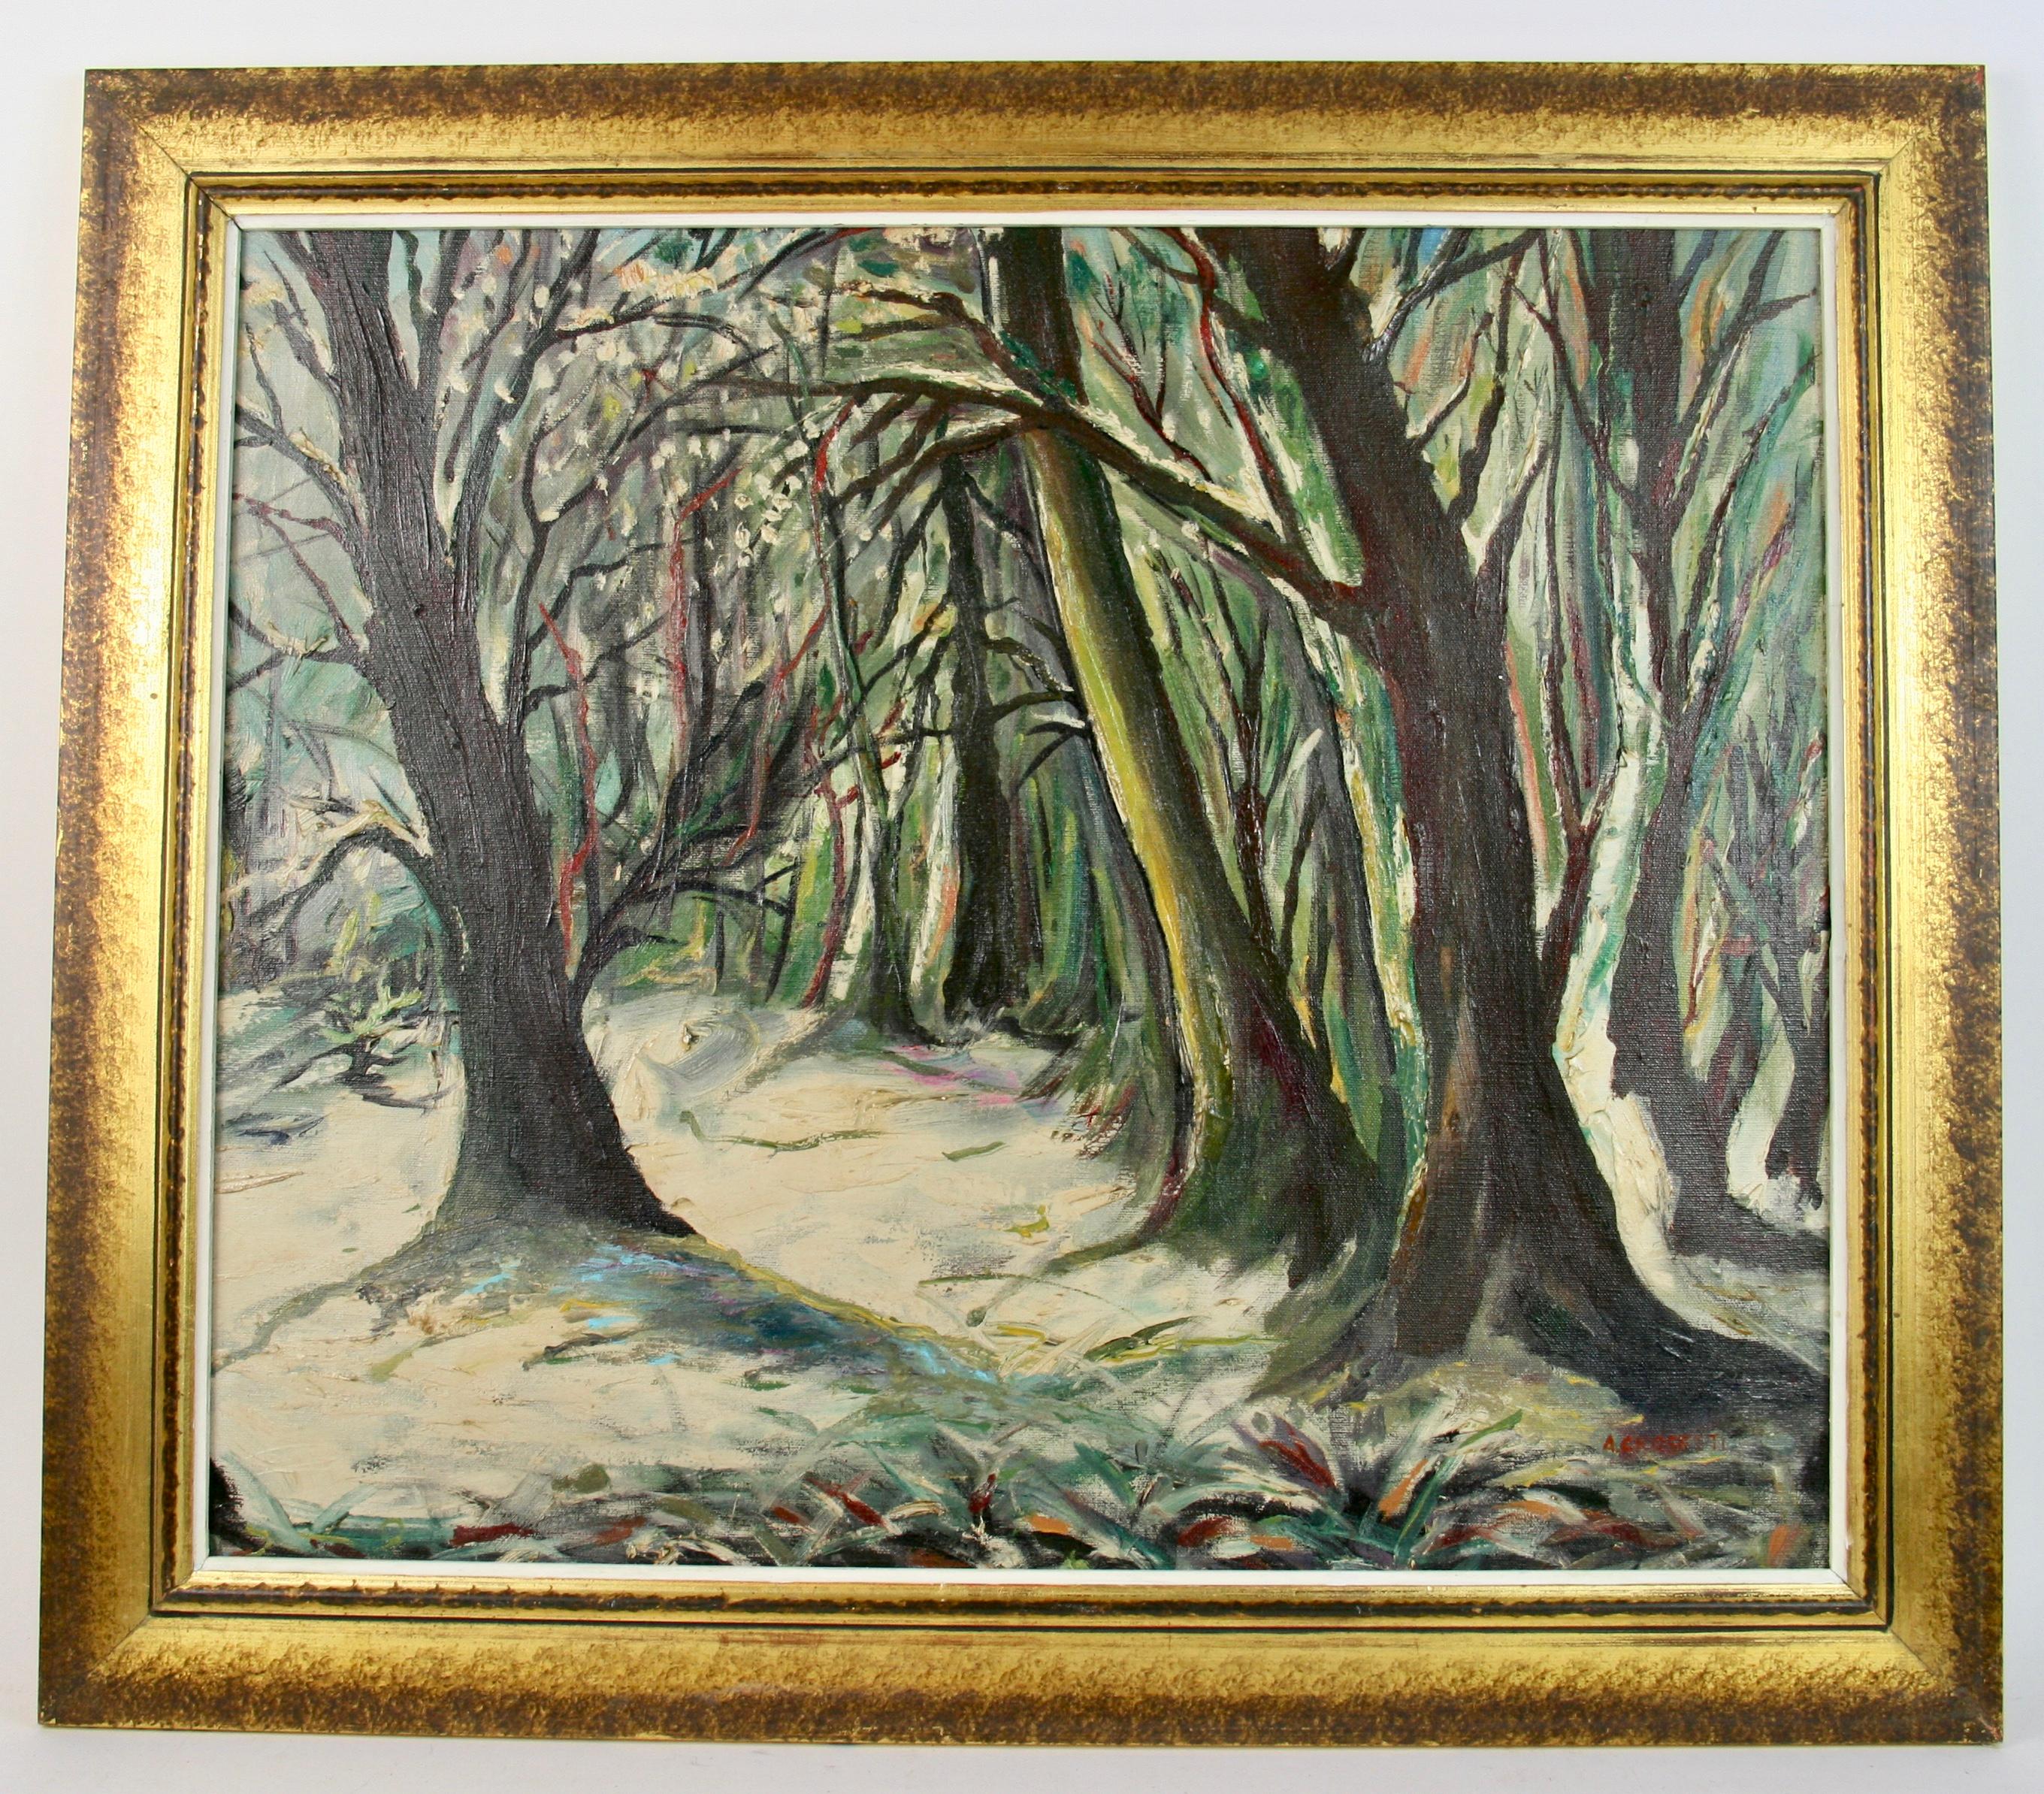 #5-3491 Forest oil on canvas applied to a board, displayed in a gilt-wood frame
Signed by Crossetti lower right.
Image size 19.50 H x 23 W